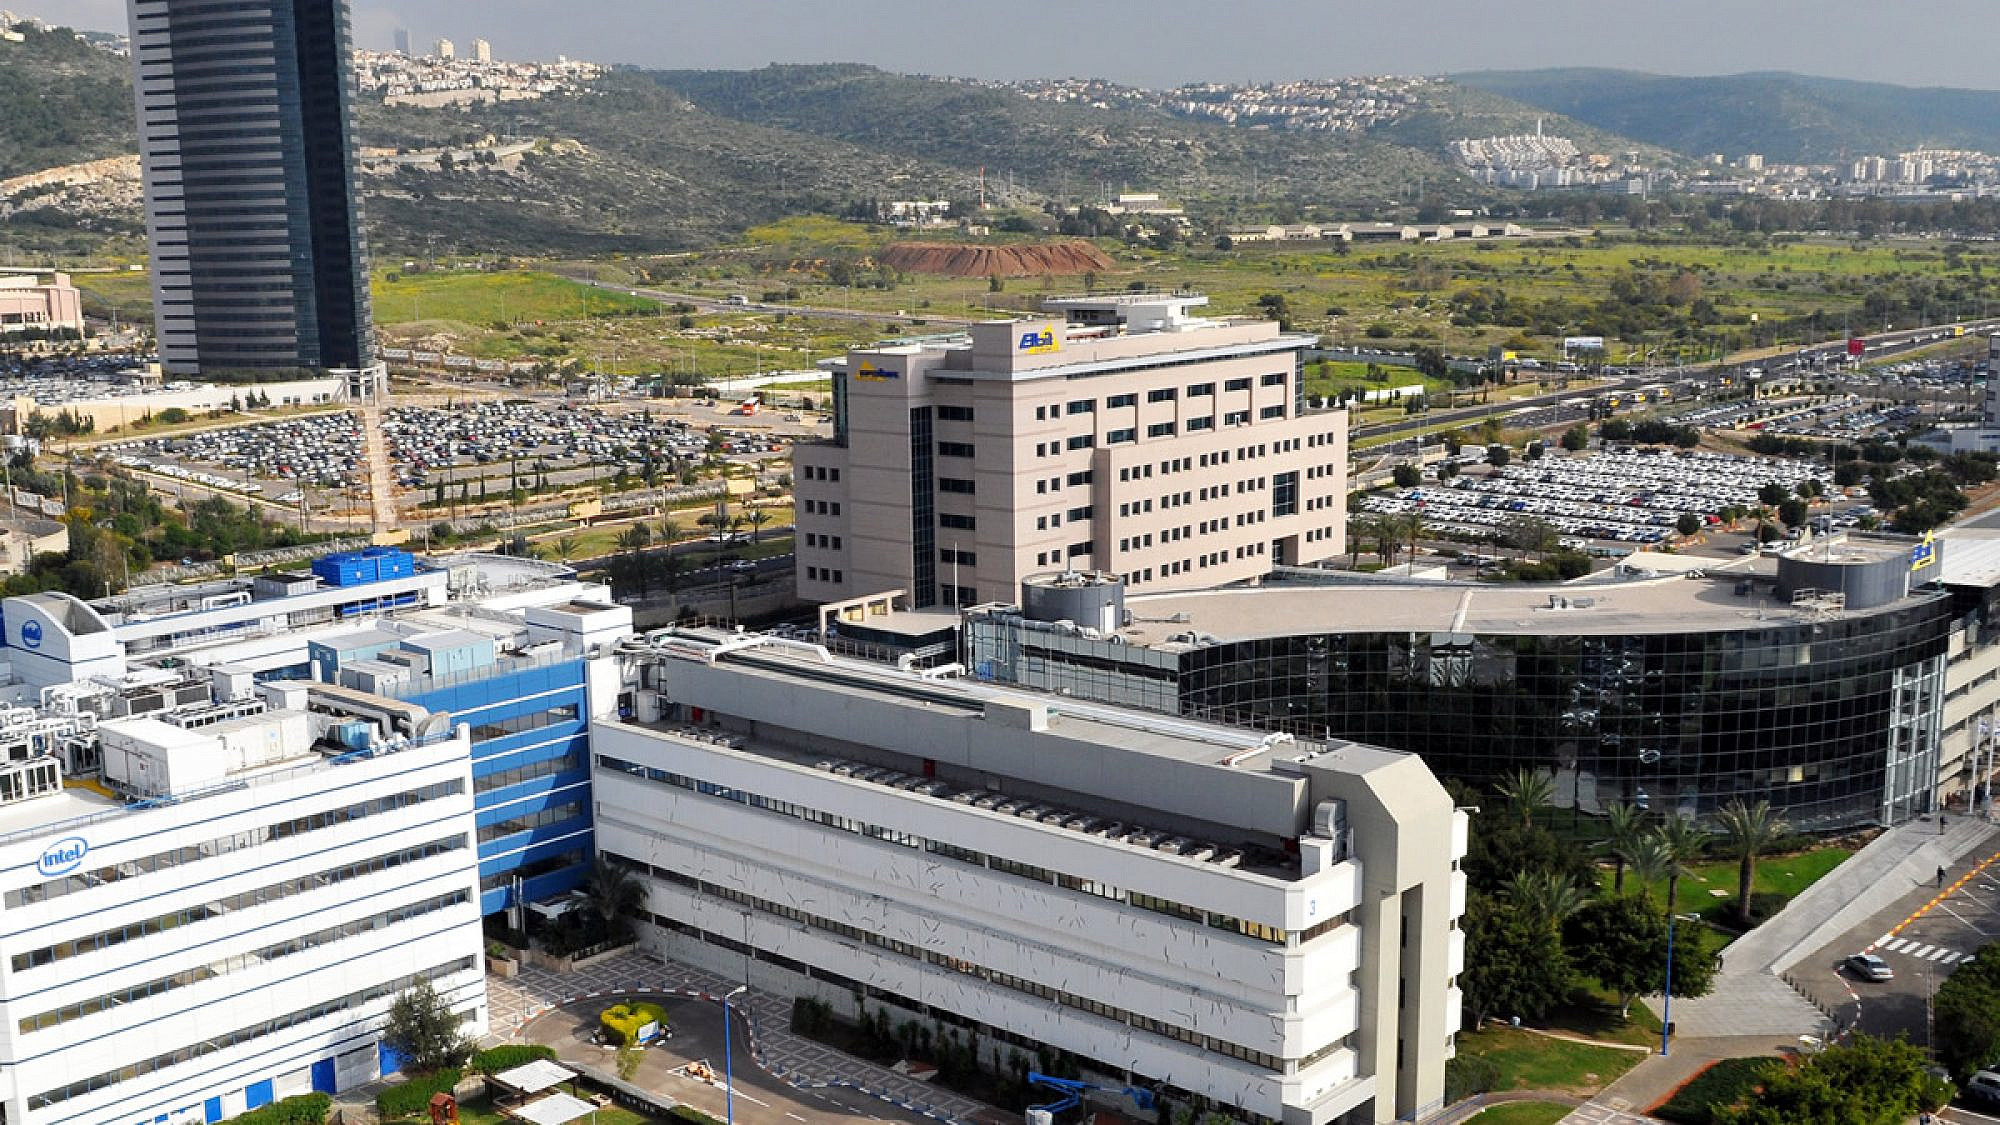 The Matam High-Tech Park at the southern entrance to Haifa. The buildings in the foreground belong to Intel and Elbit Systems. Credit: Zvi Roger/Wikimedia Commons.